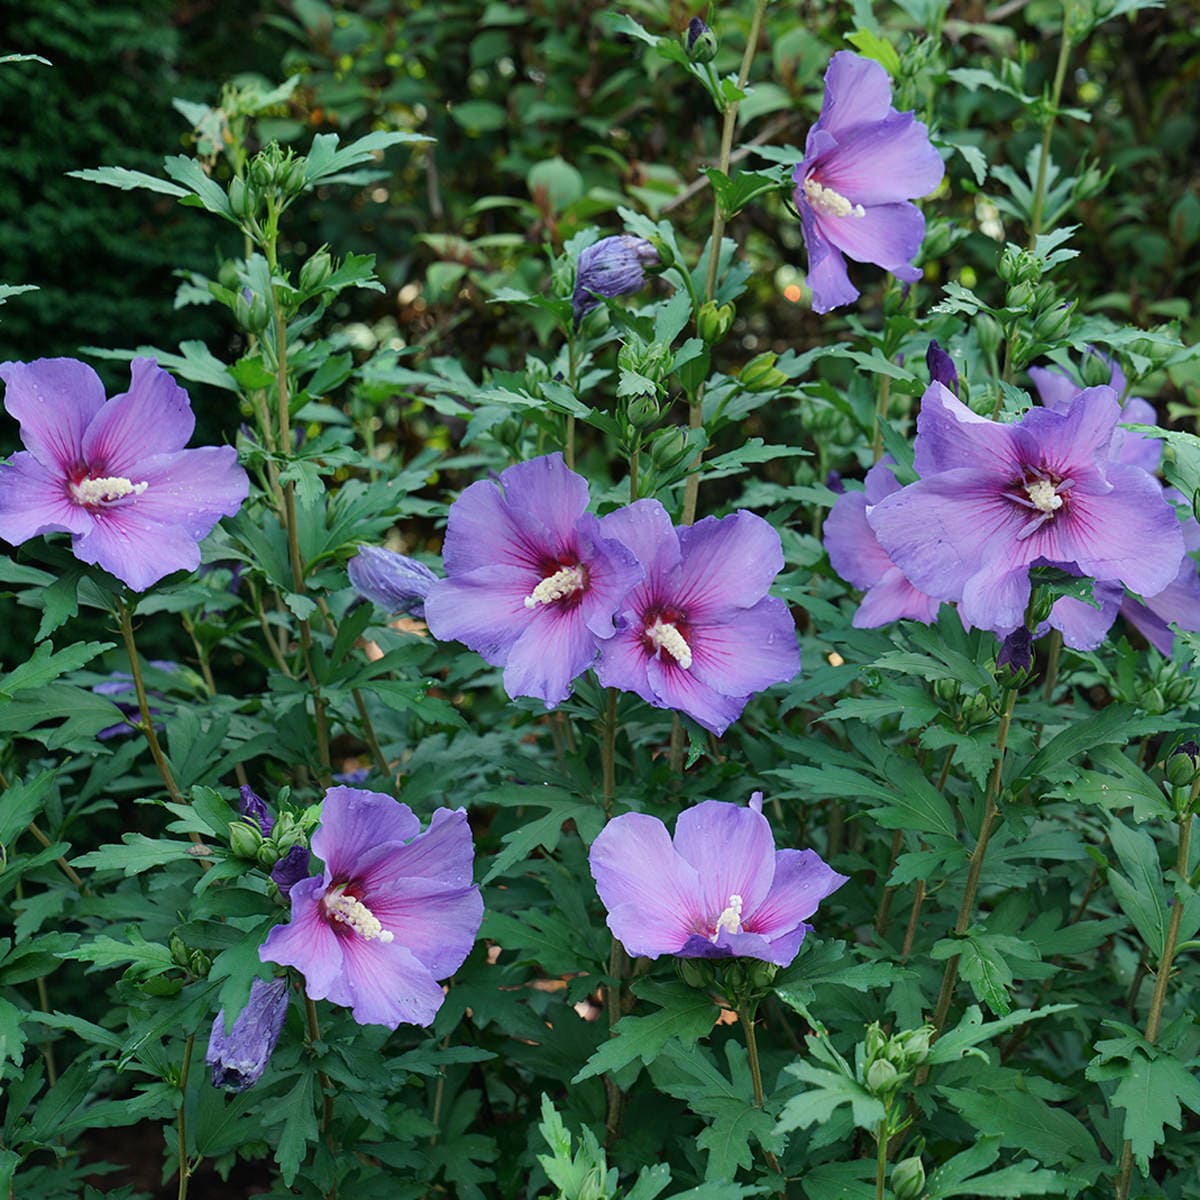 Image of Cluster of purple rose of Sharon flowers